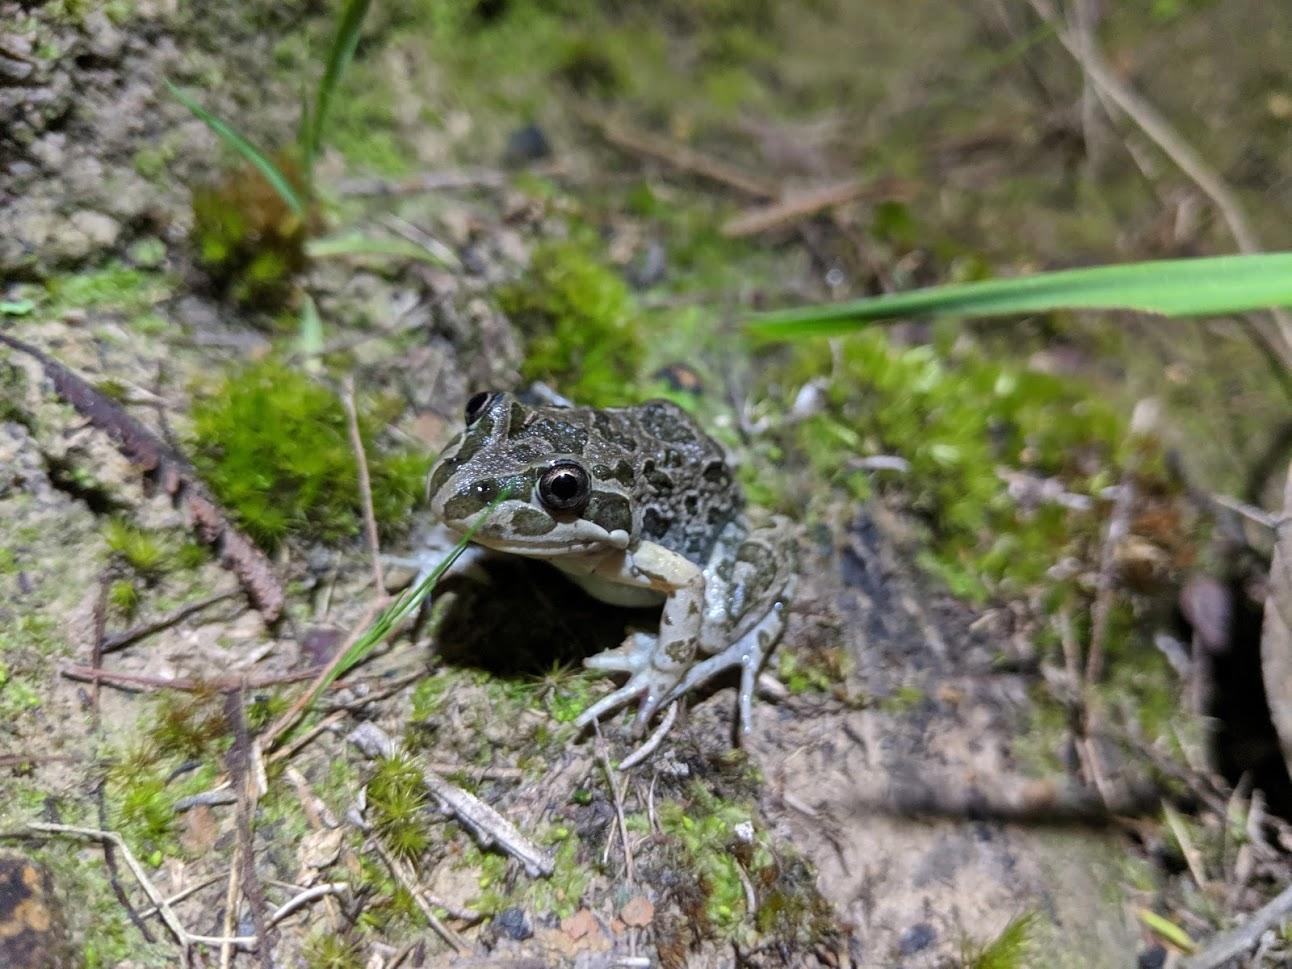 A Spotted Marsh Frog on moss and dirt